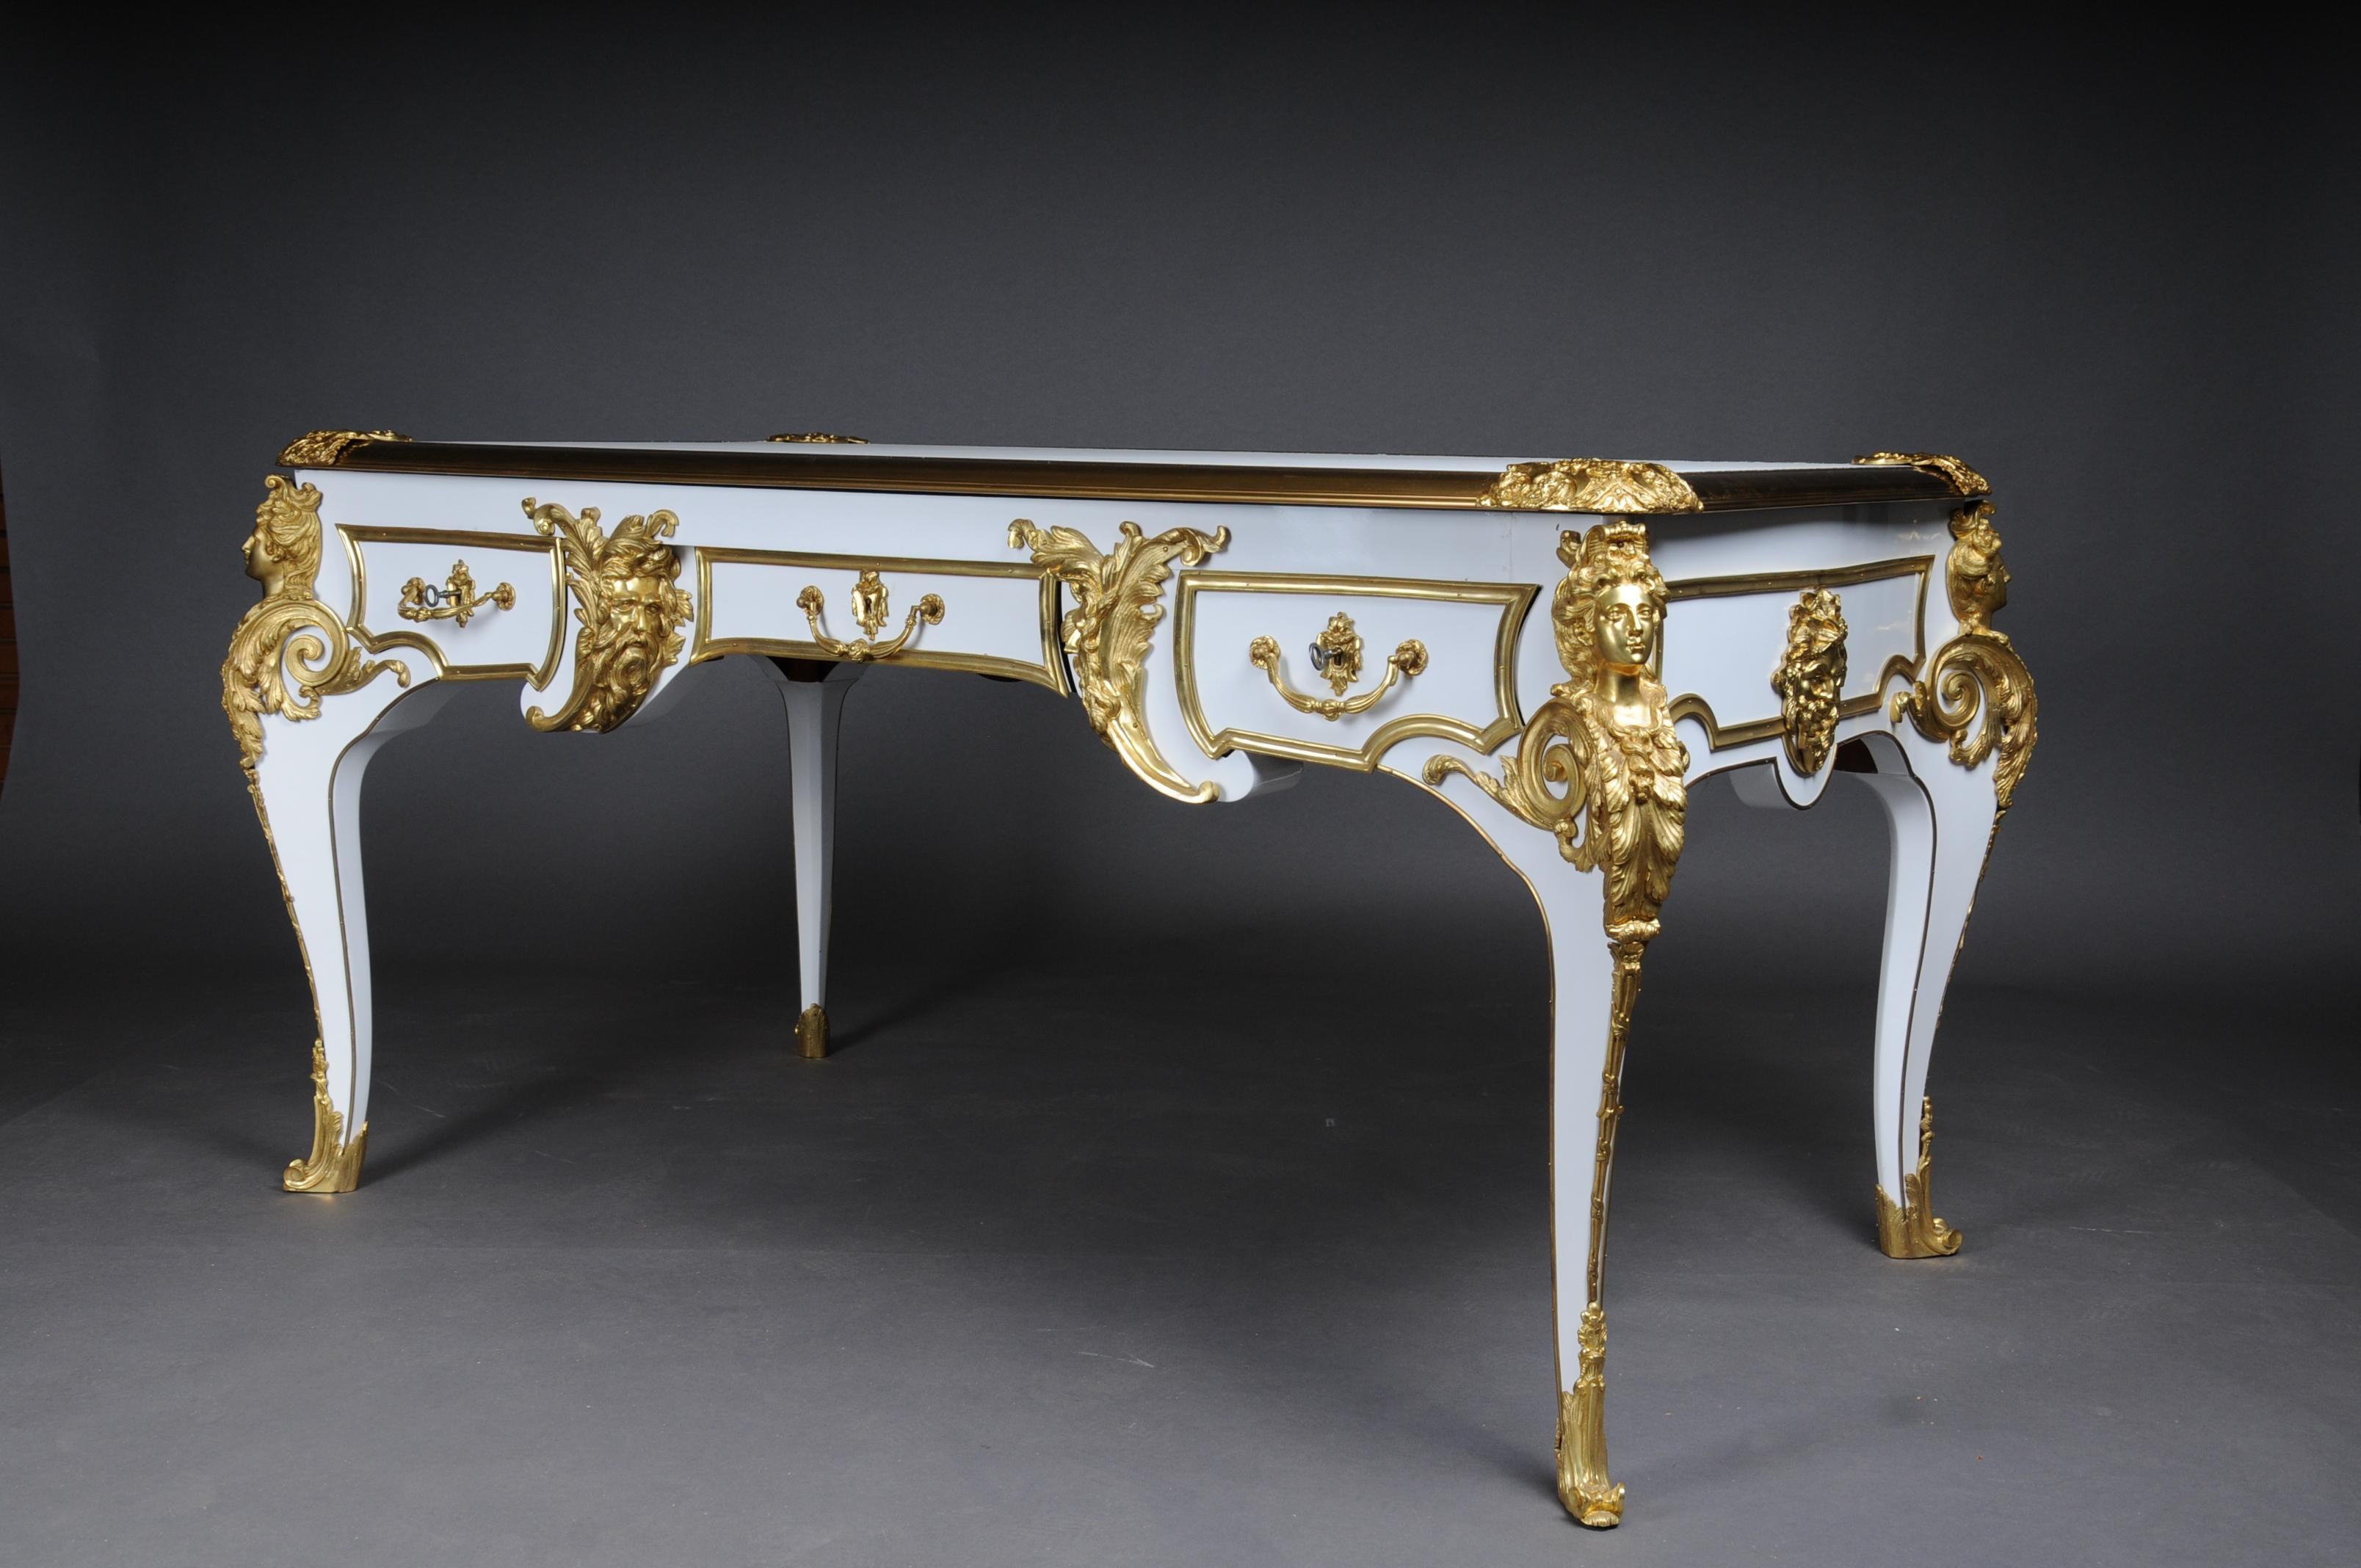 20th Century Bureau Plat/Desk high gloss white with gold after C. Boulle For Sale 4